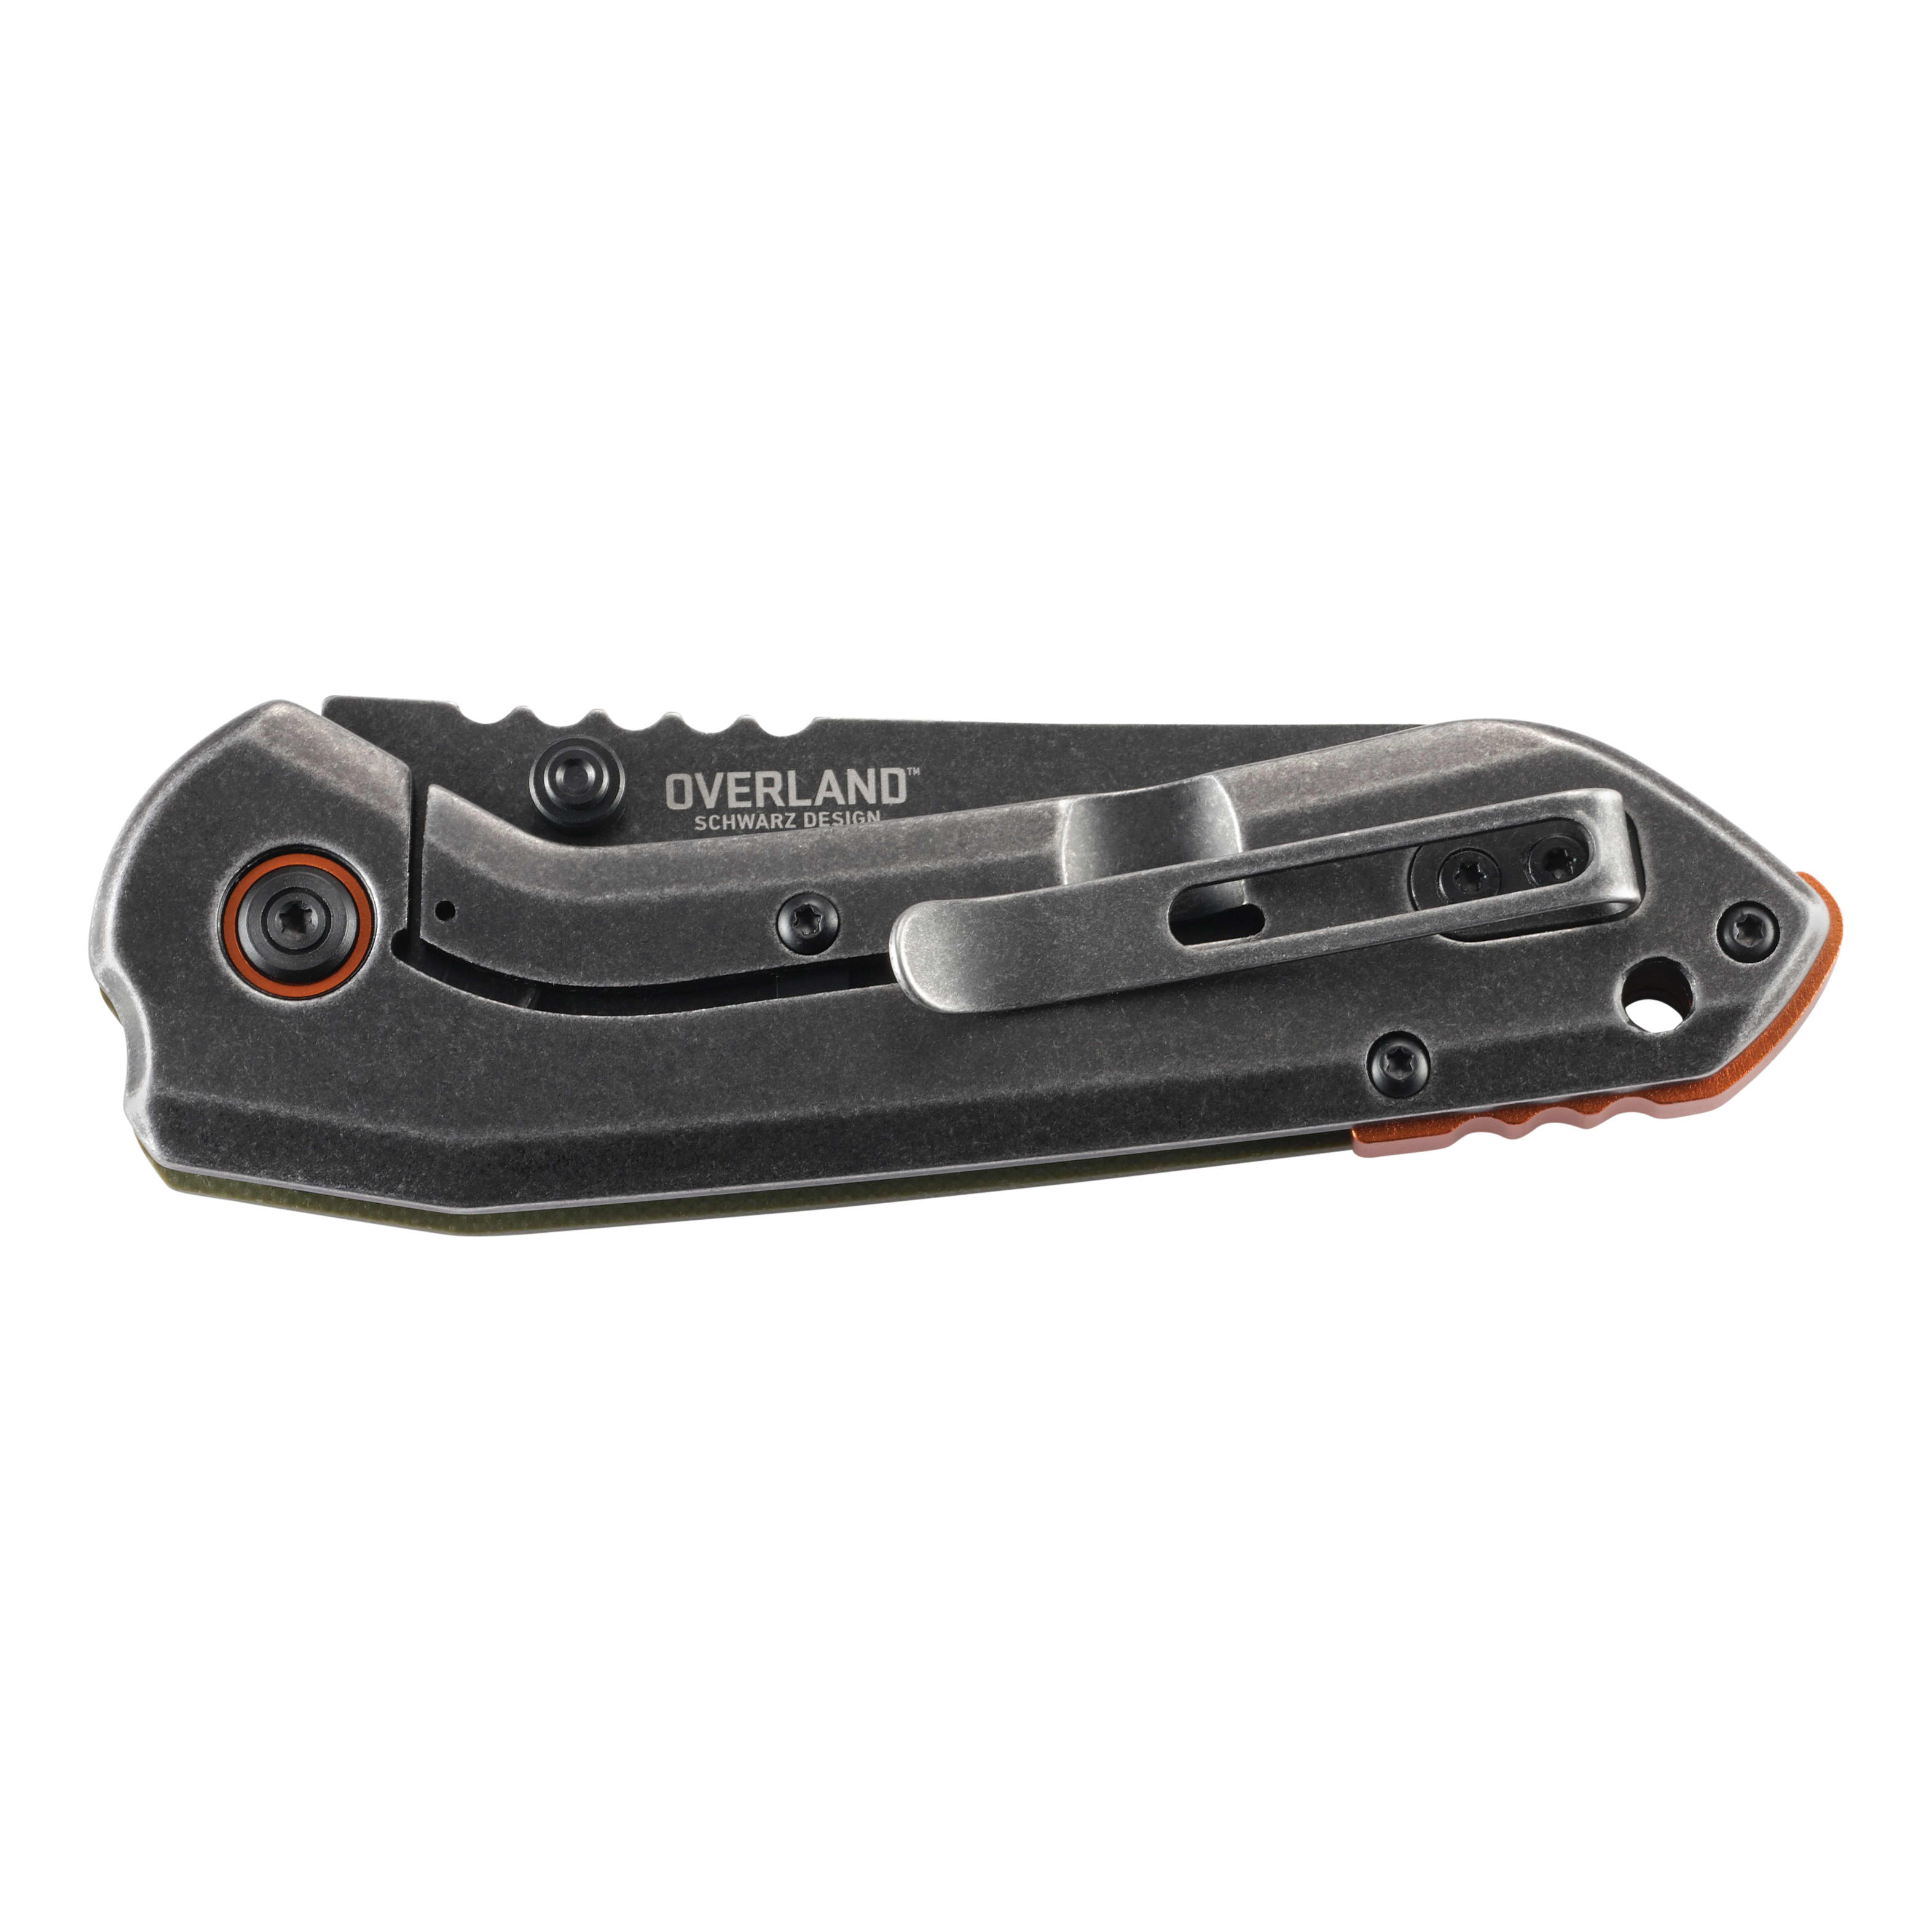 CRKT® OVERLAND™ Folding Knife - Closed - Clip View